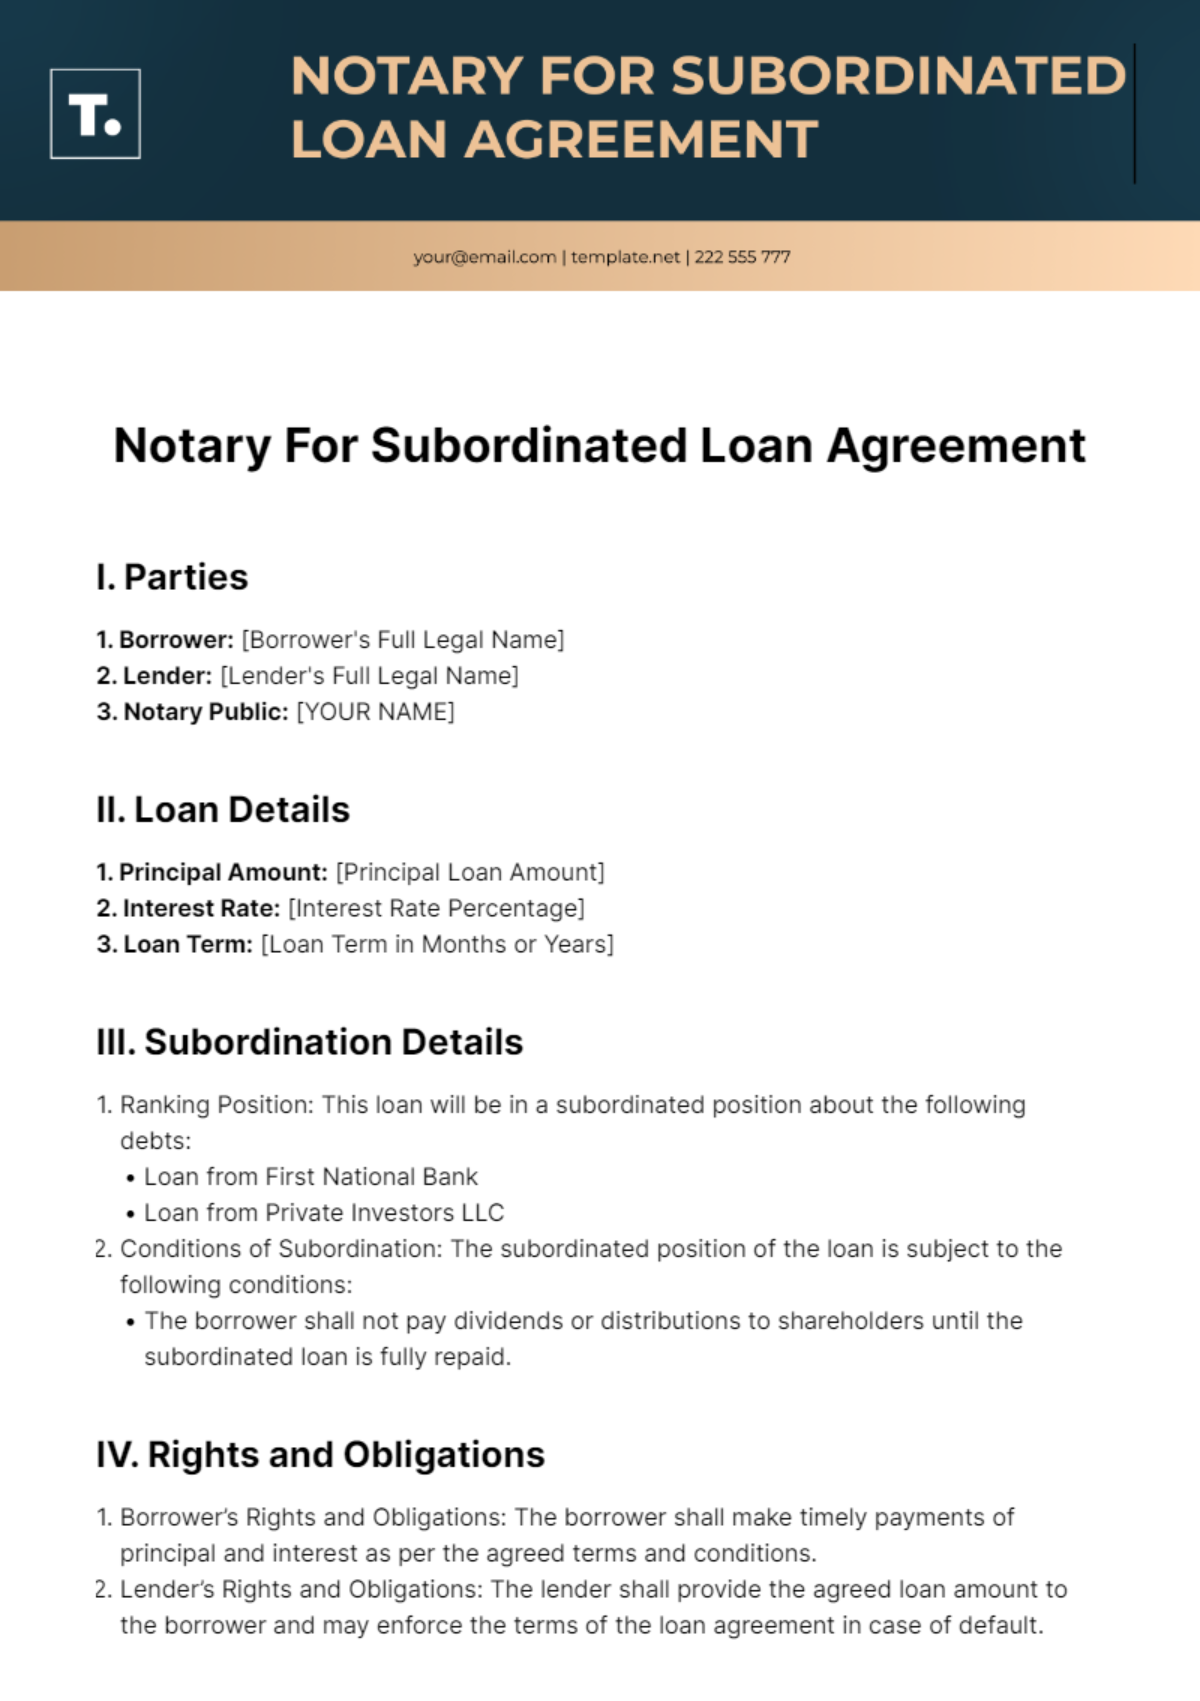 Free Notary For Subordinated Loan Agreement Template